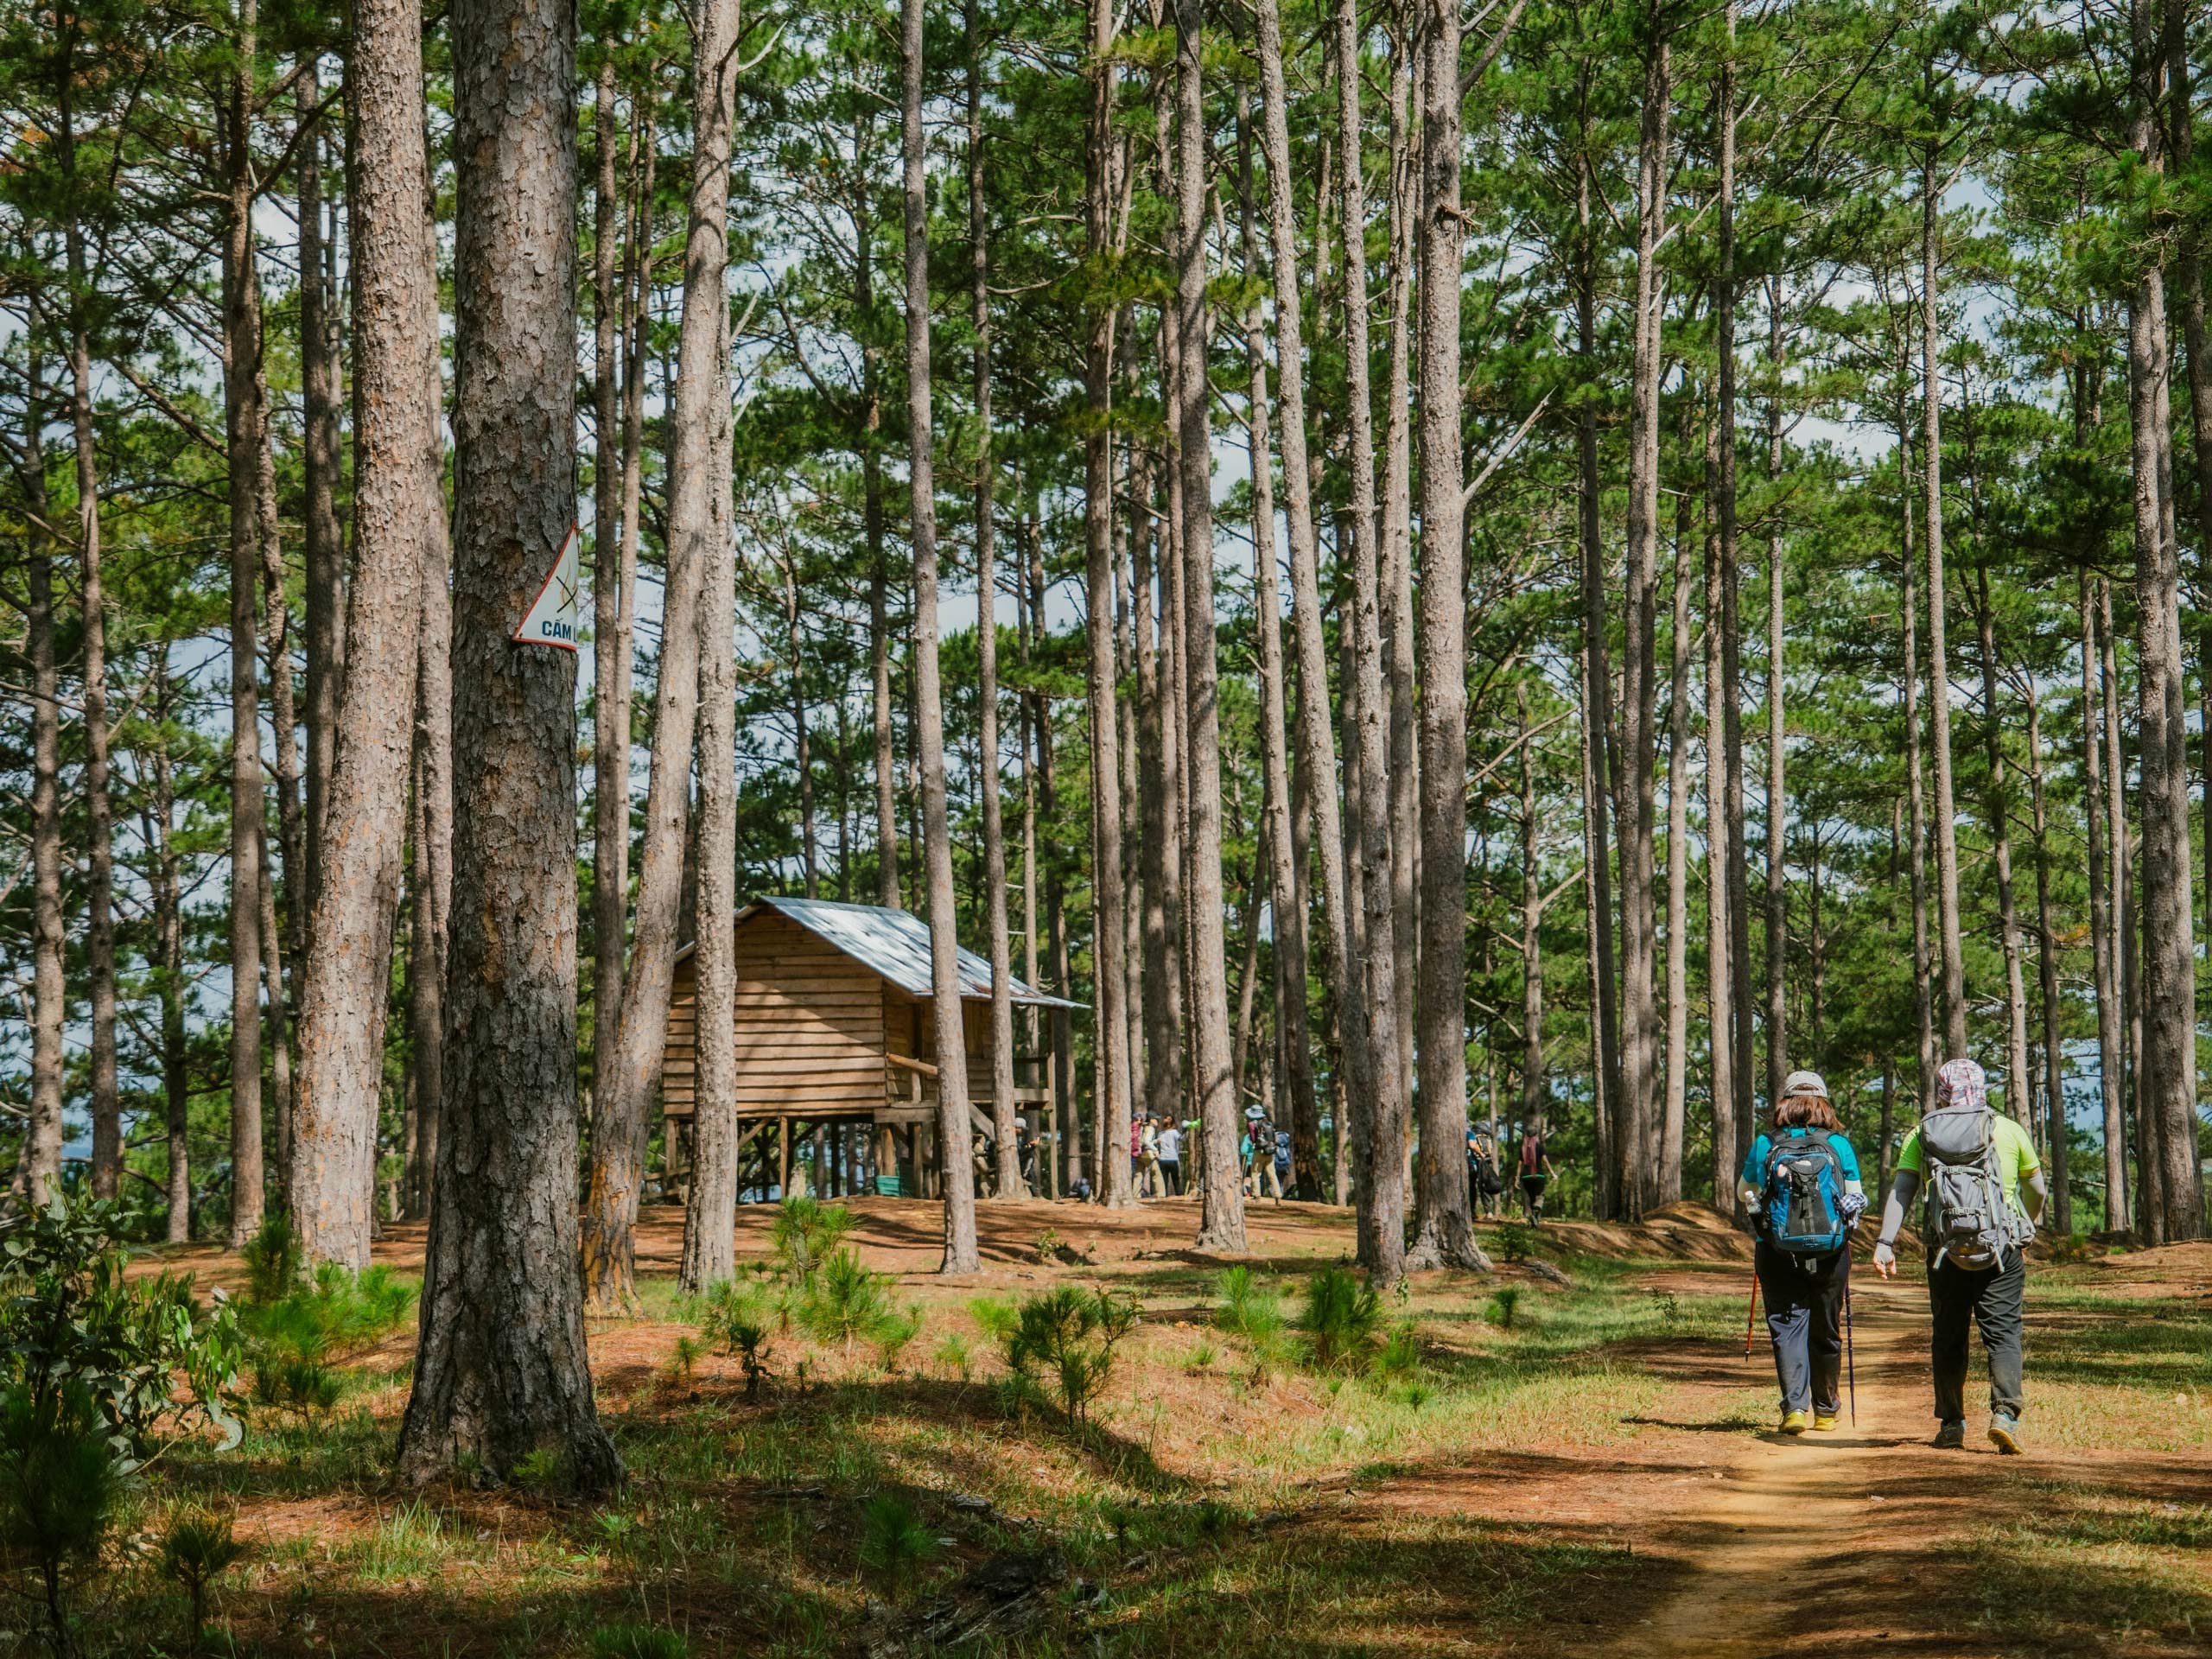 Couple with backpacks walking through the forest toward cabin